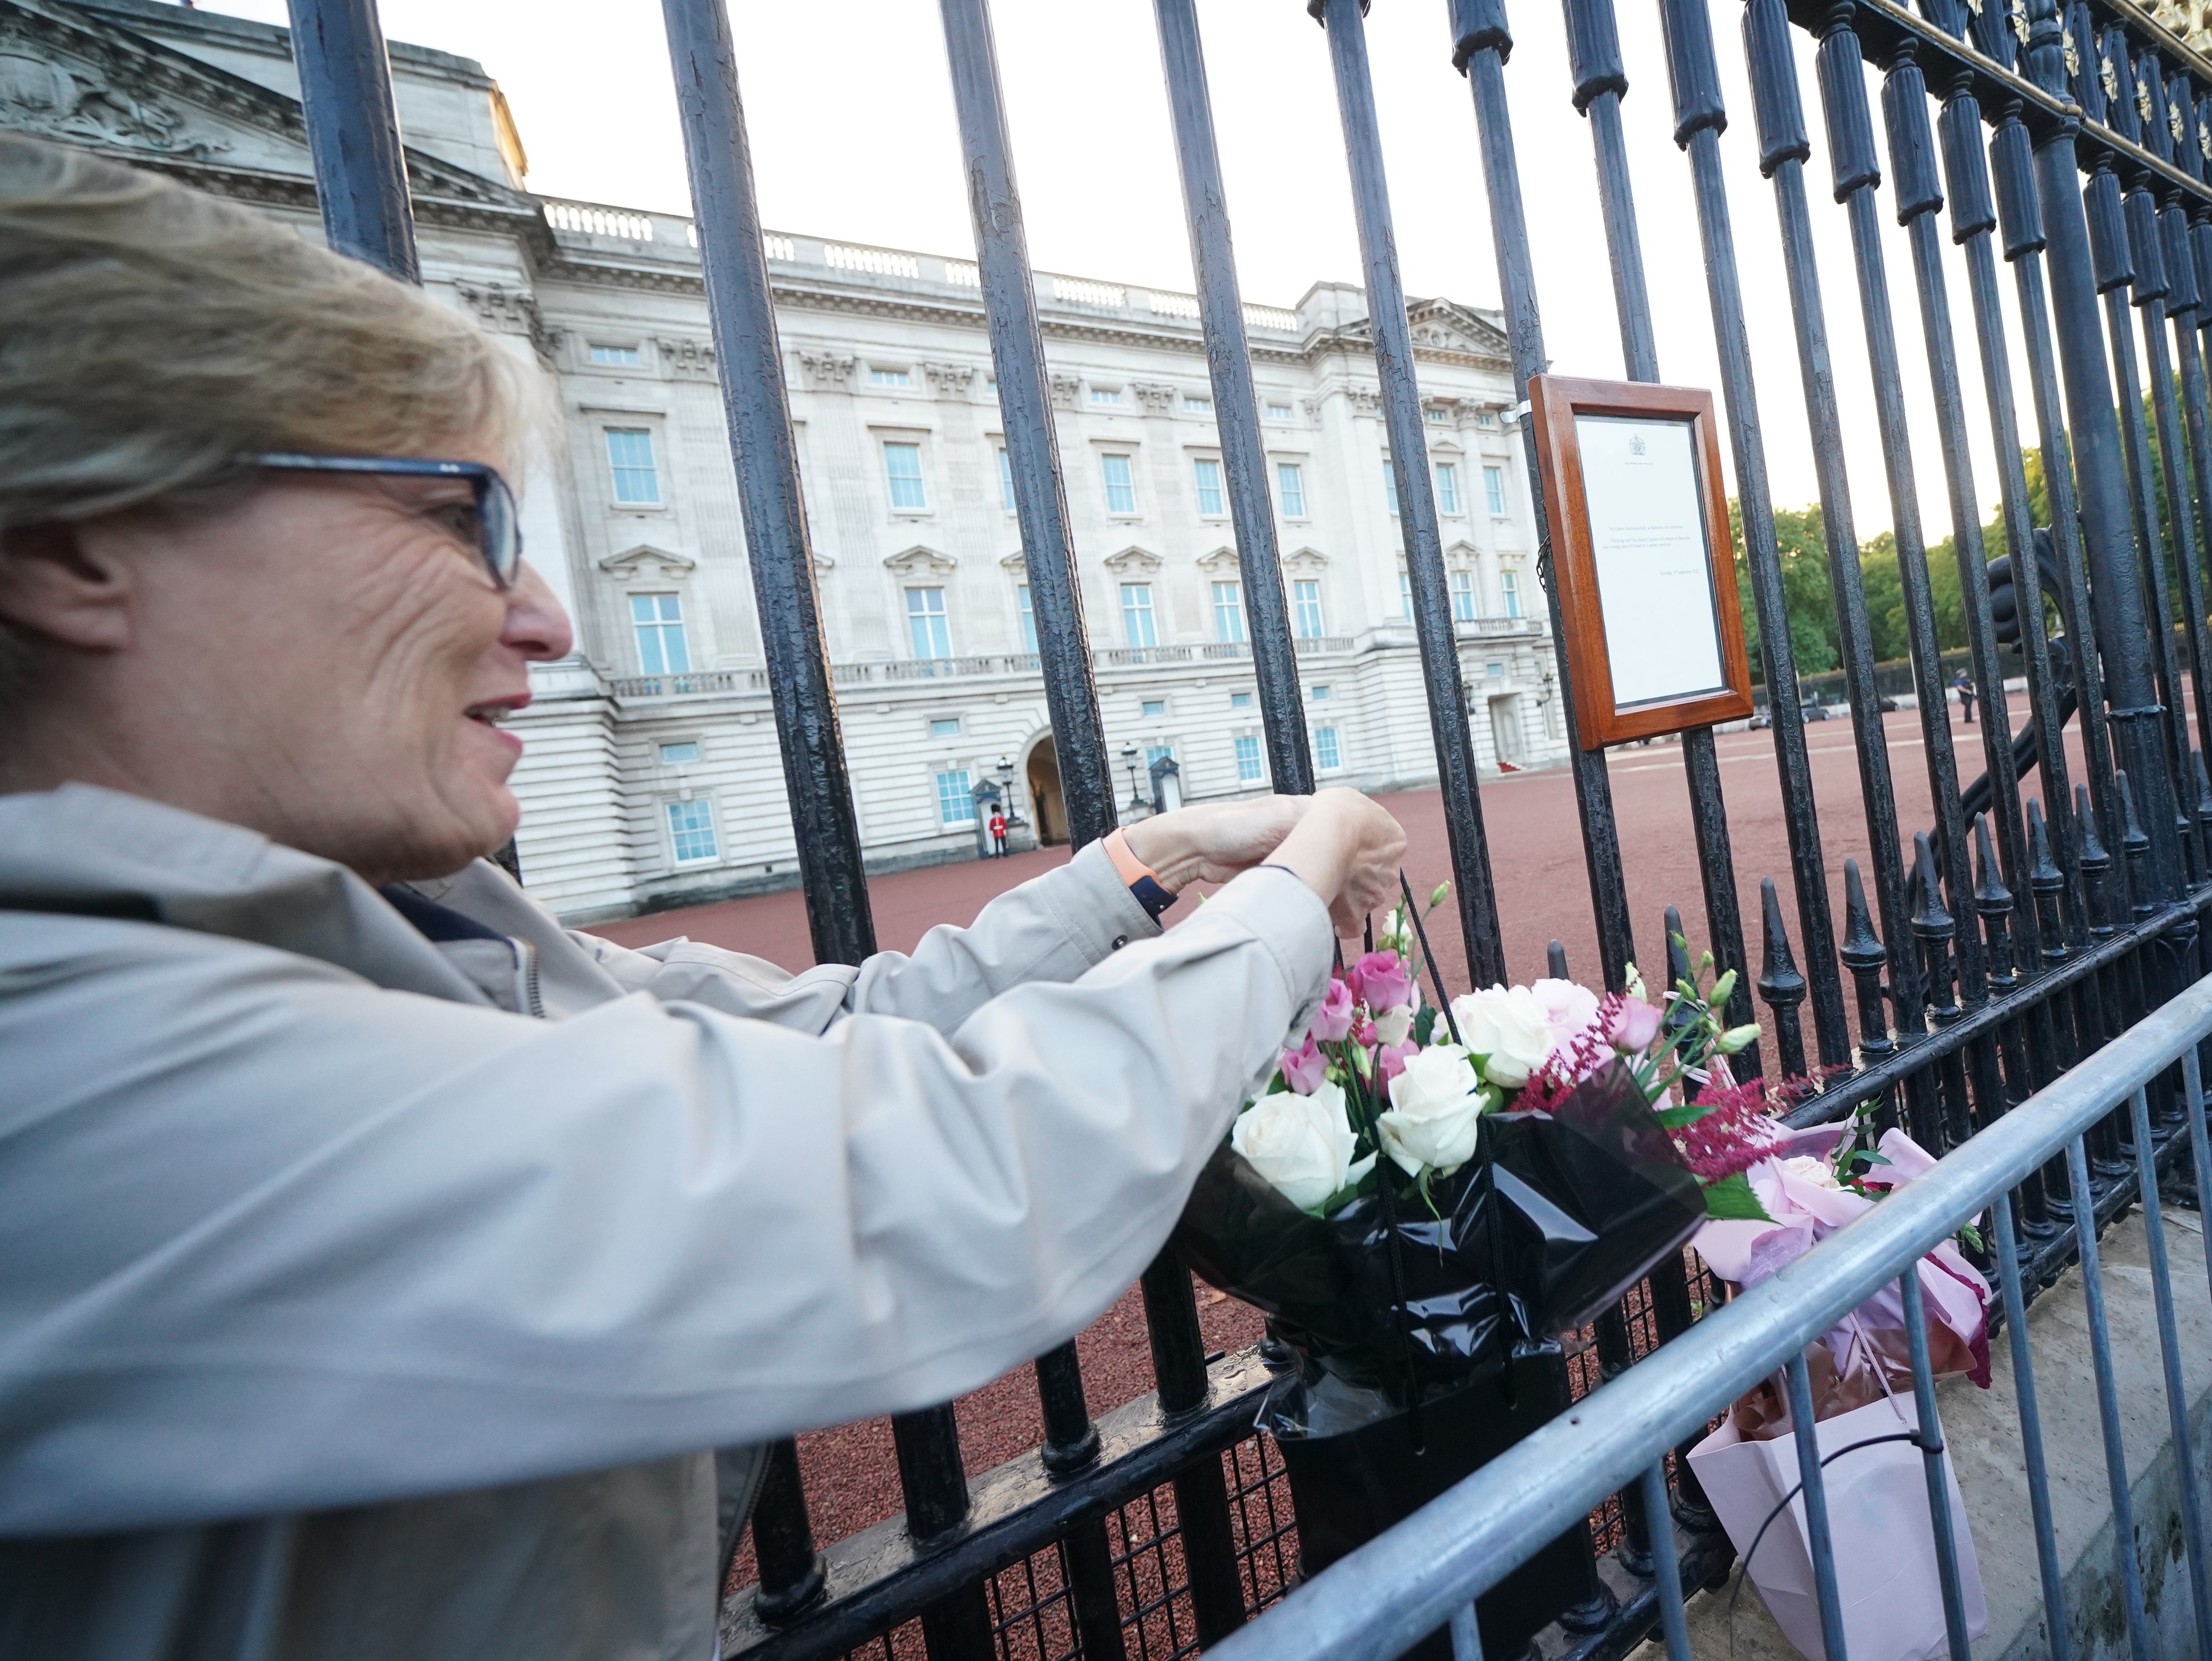 A woman ties flowers to the gates at Buckingham Palace announcing the Queen’s death (Yui Mok/PA)